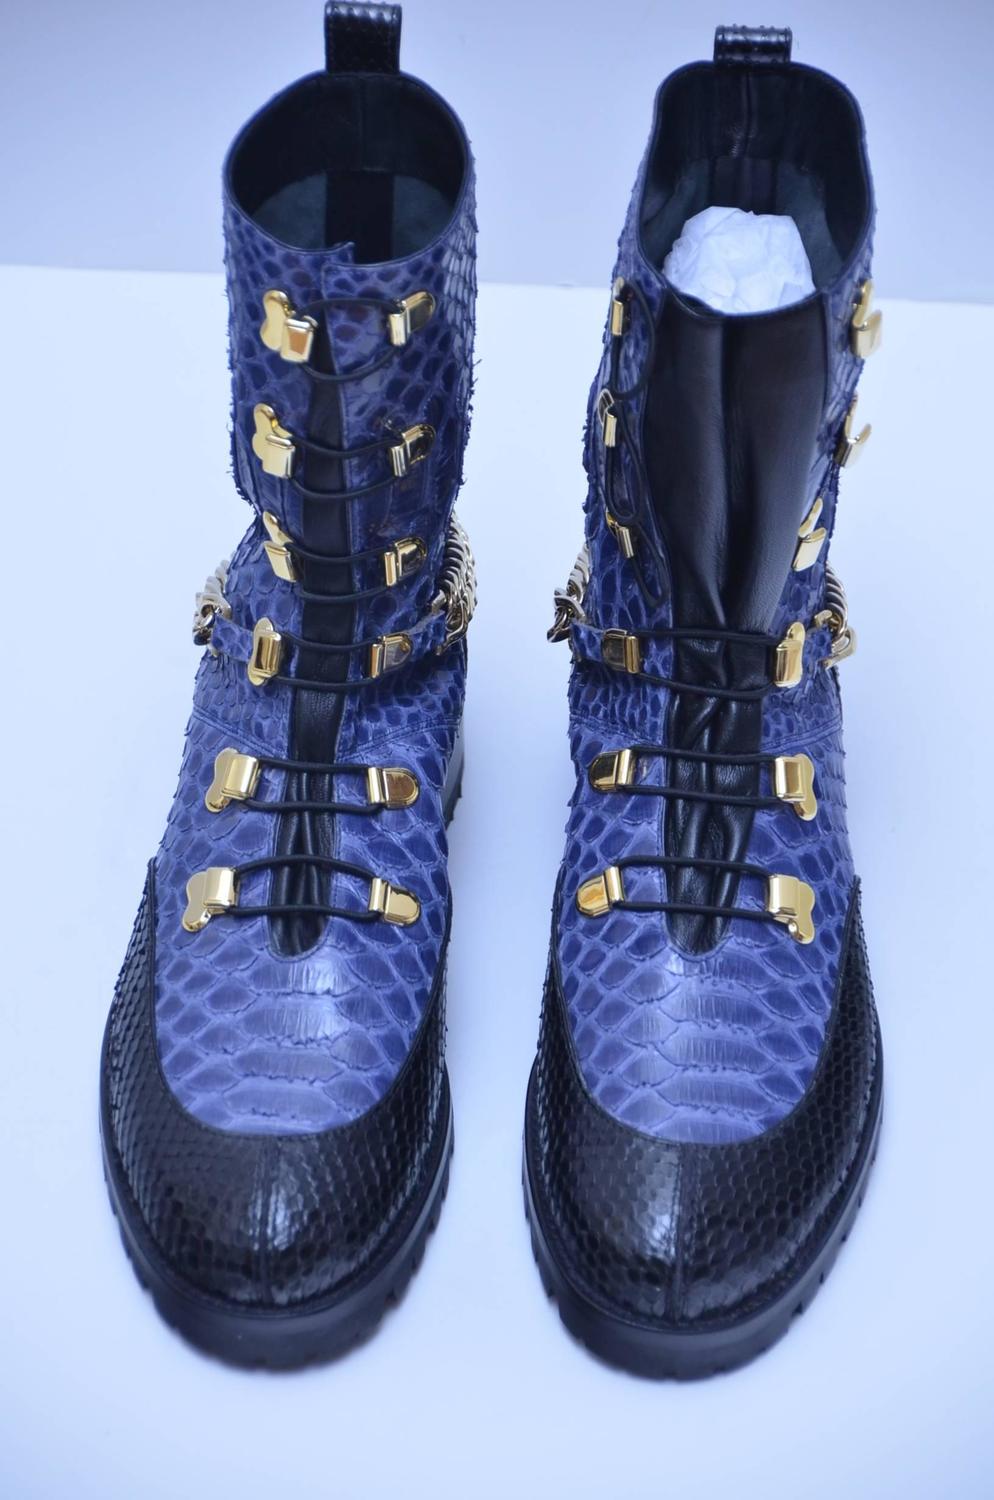 Rare Christian Louboutin Combat Boots Paris Haute Couture Spring 2016 40 New For Sale at 1stdibs